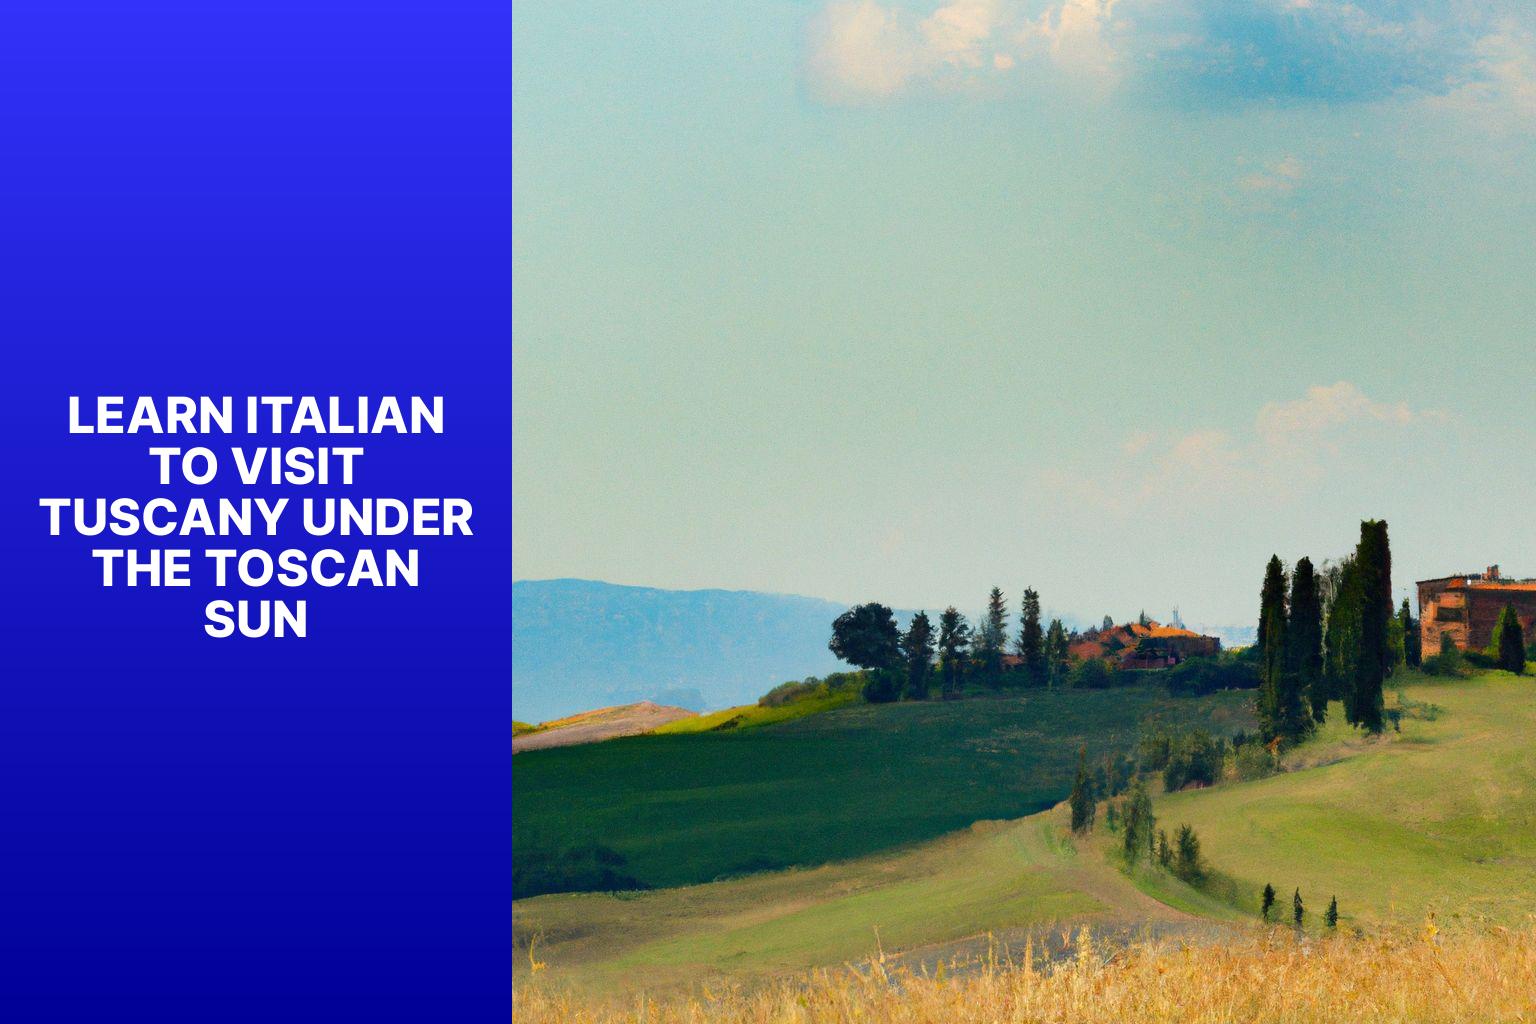 Learn italian to visit tuscany Under the Toscan sun